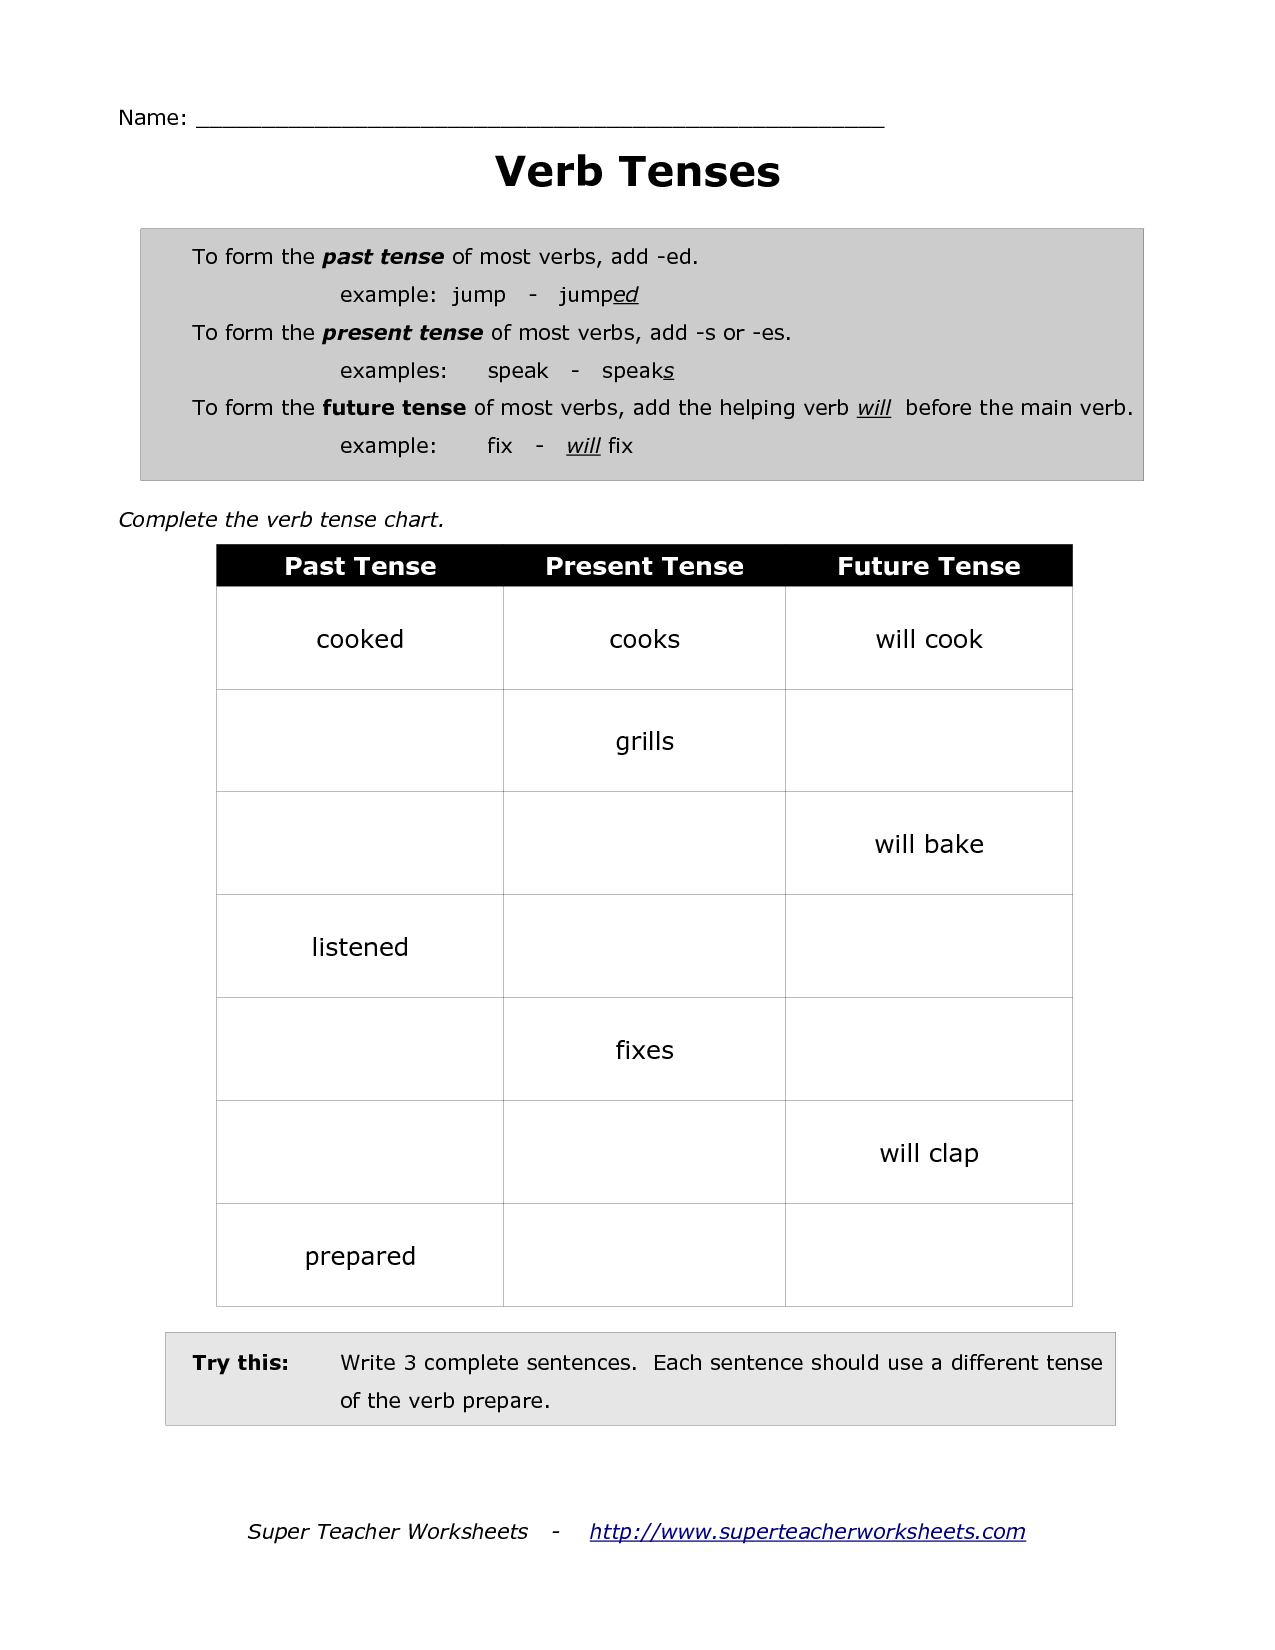 13-best-images-of-future-world-worksheets-french-future-tense-worksheet-leap-year-printable